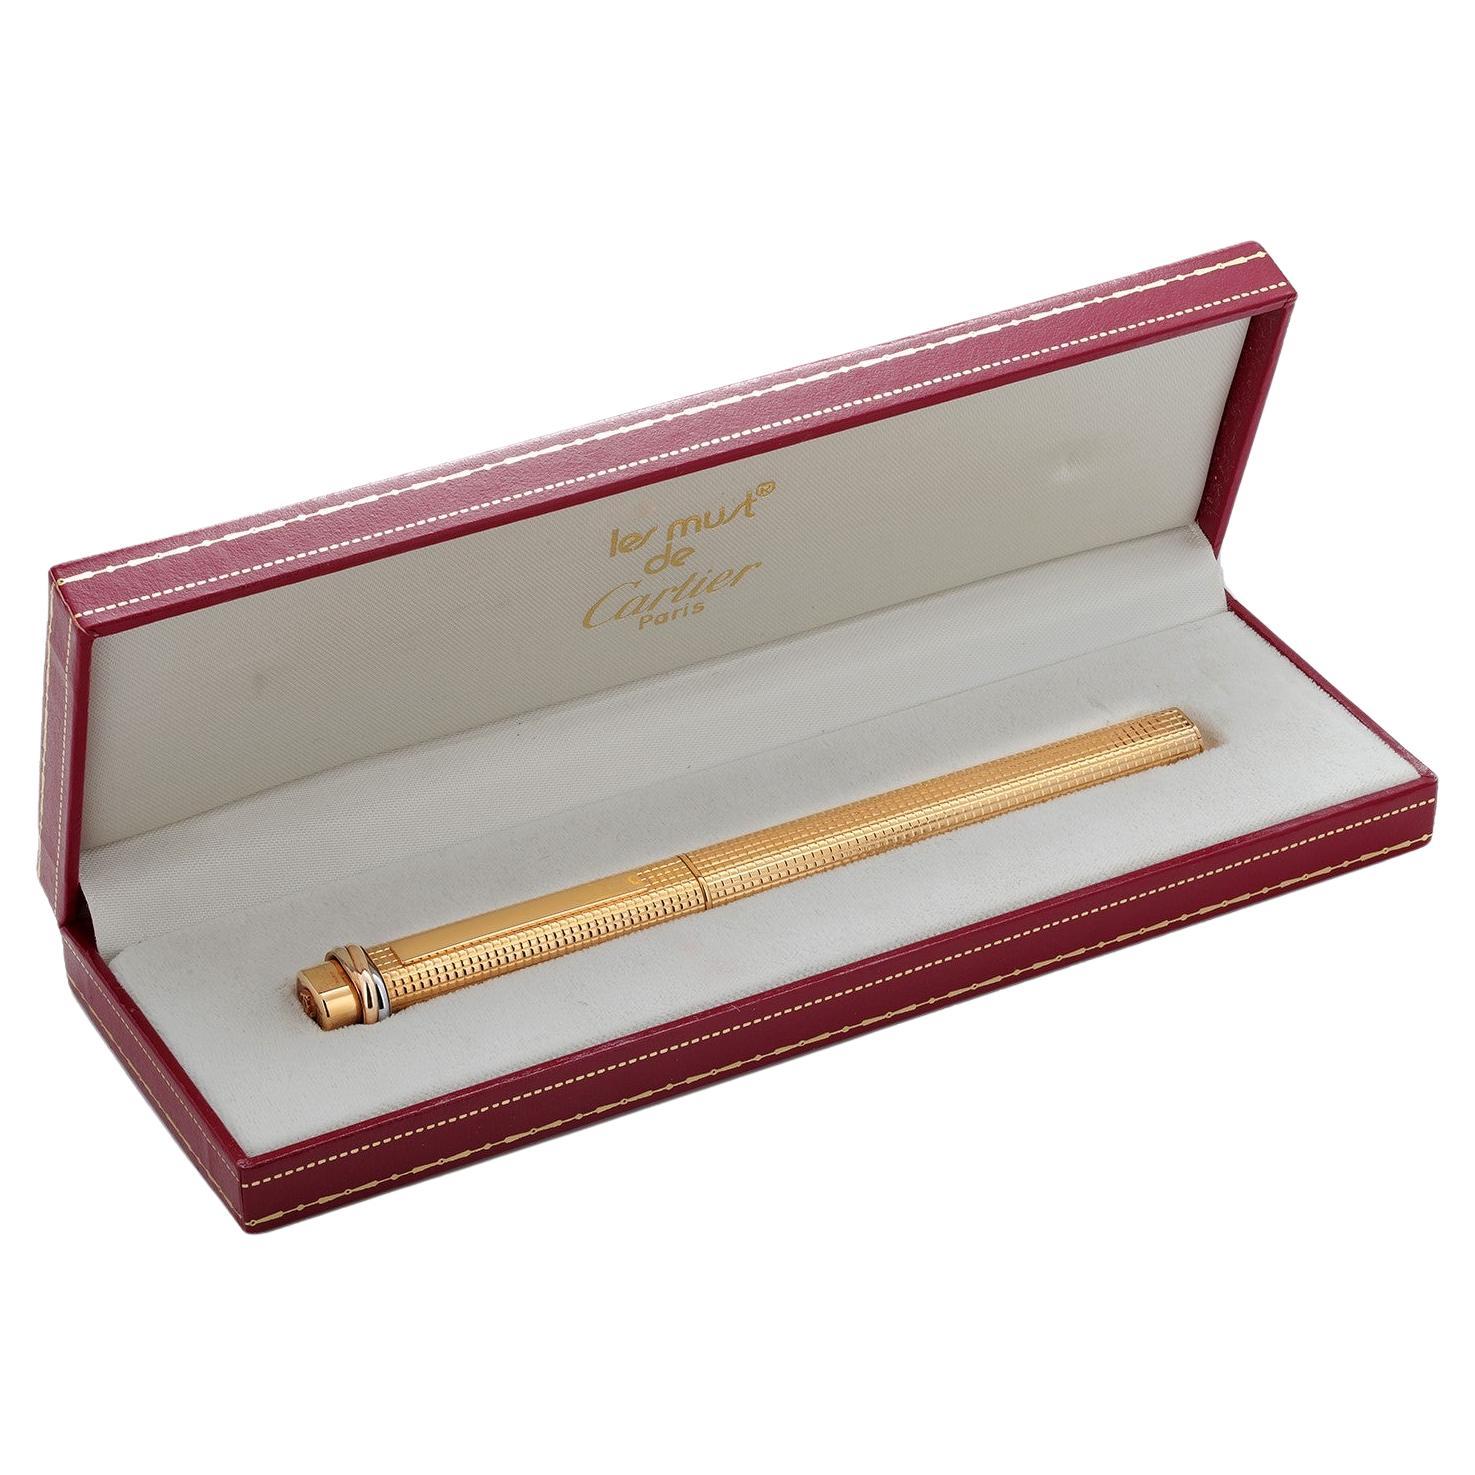 Cartier Vintage Vendome Gilded Knurled Body Trinity Ballpoint Pen 292829 Boxed 